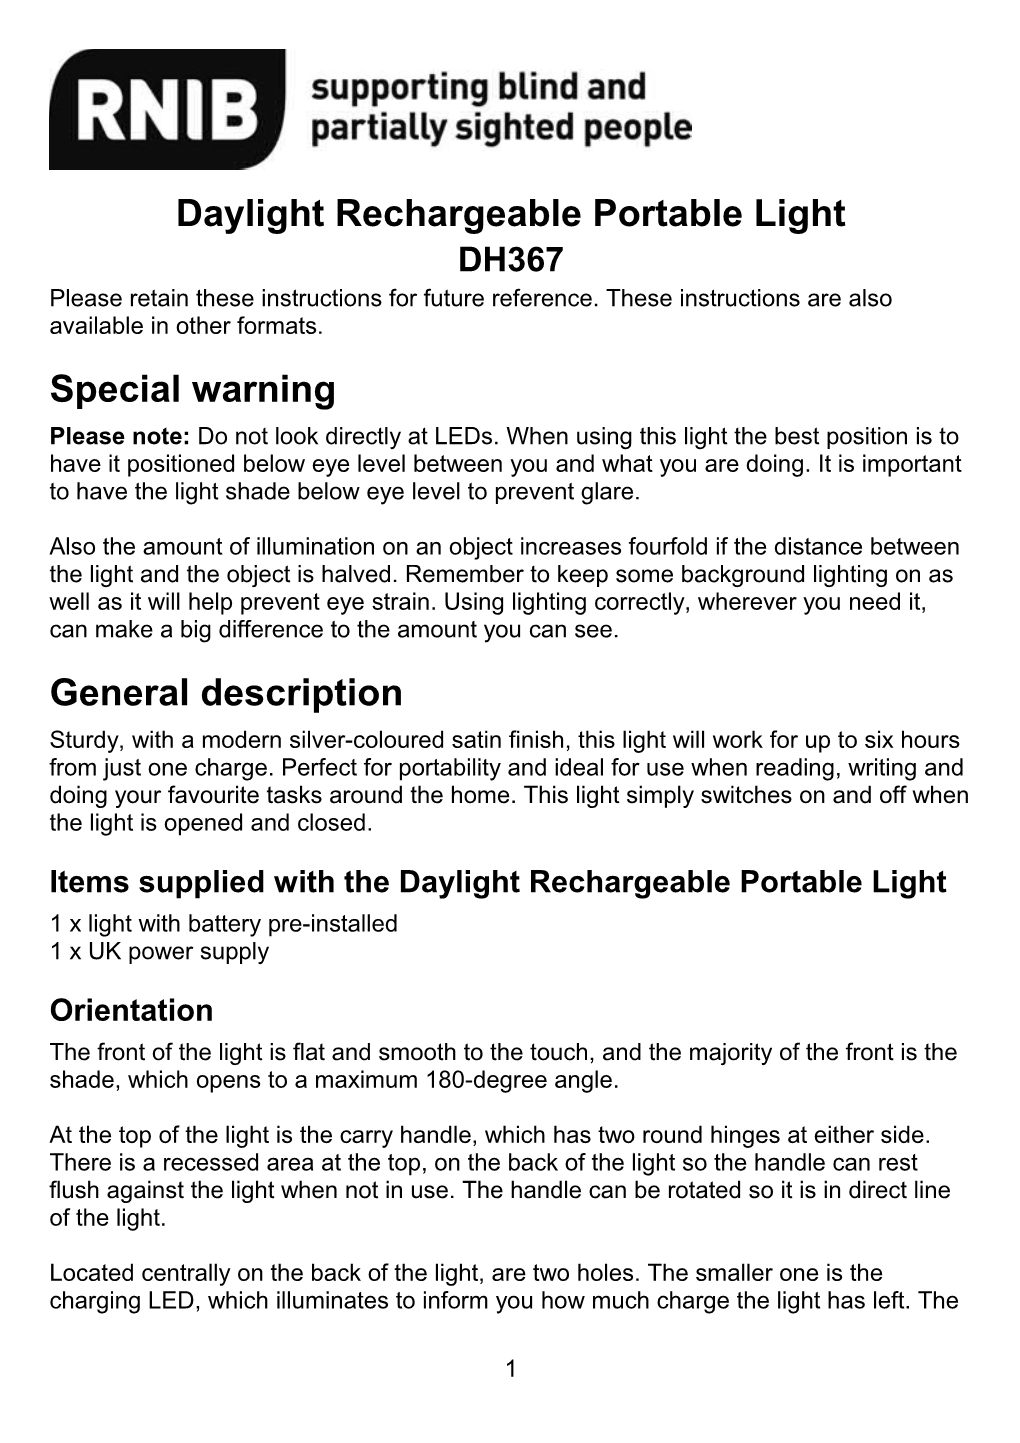 Daylight Rechargeable Portable Light